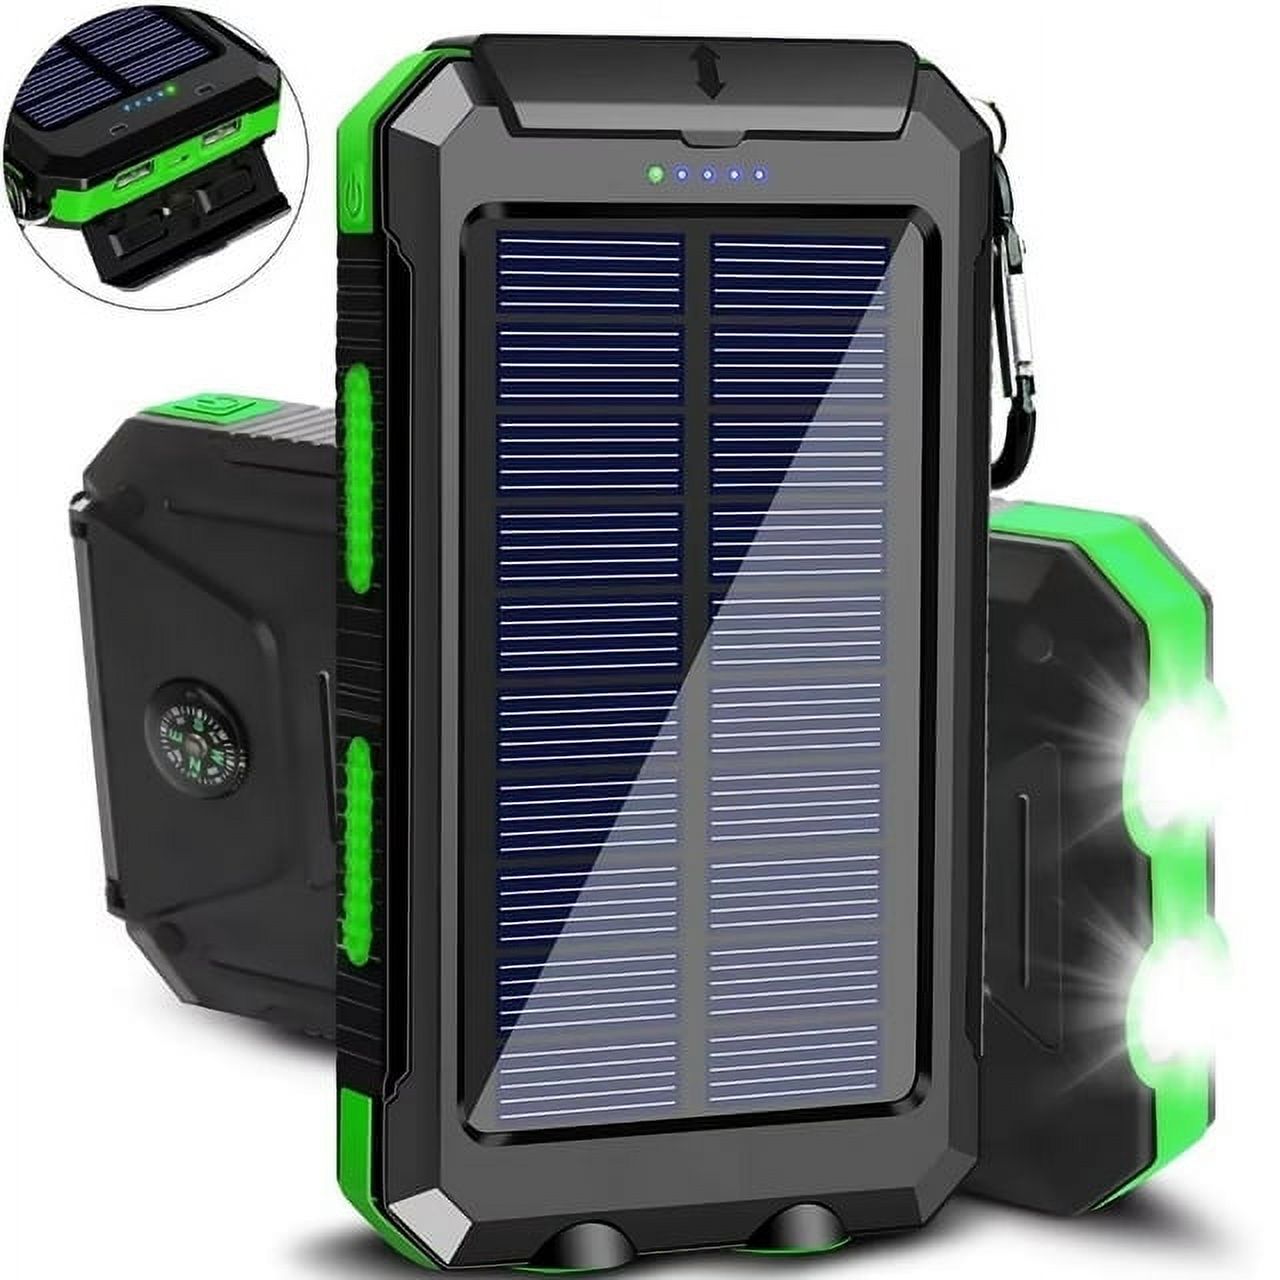 20000mAh Solar Charger for Cell Phone iphone, Portable Solar Power Bank with Dual 5V USB Ports, 2 Led Light Flashlight, Compass Battery Pack for Outdoor Camping Hiking(Green) - image 1 of 7